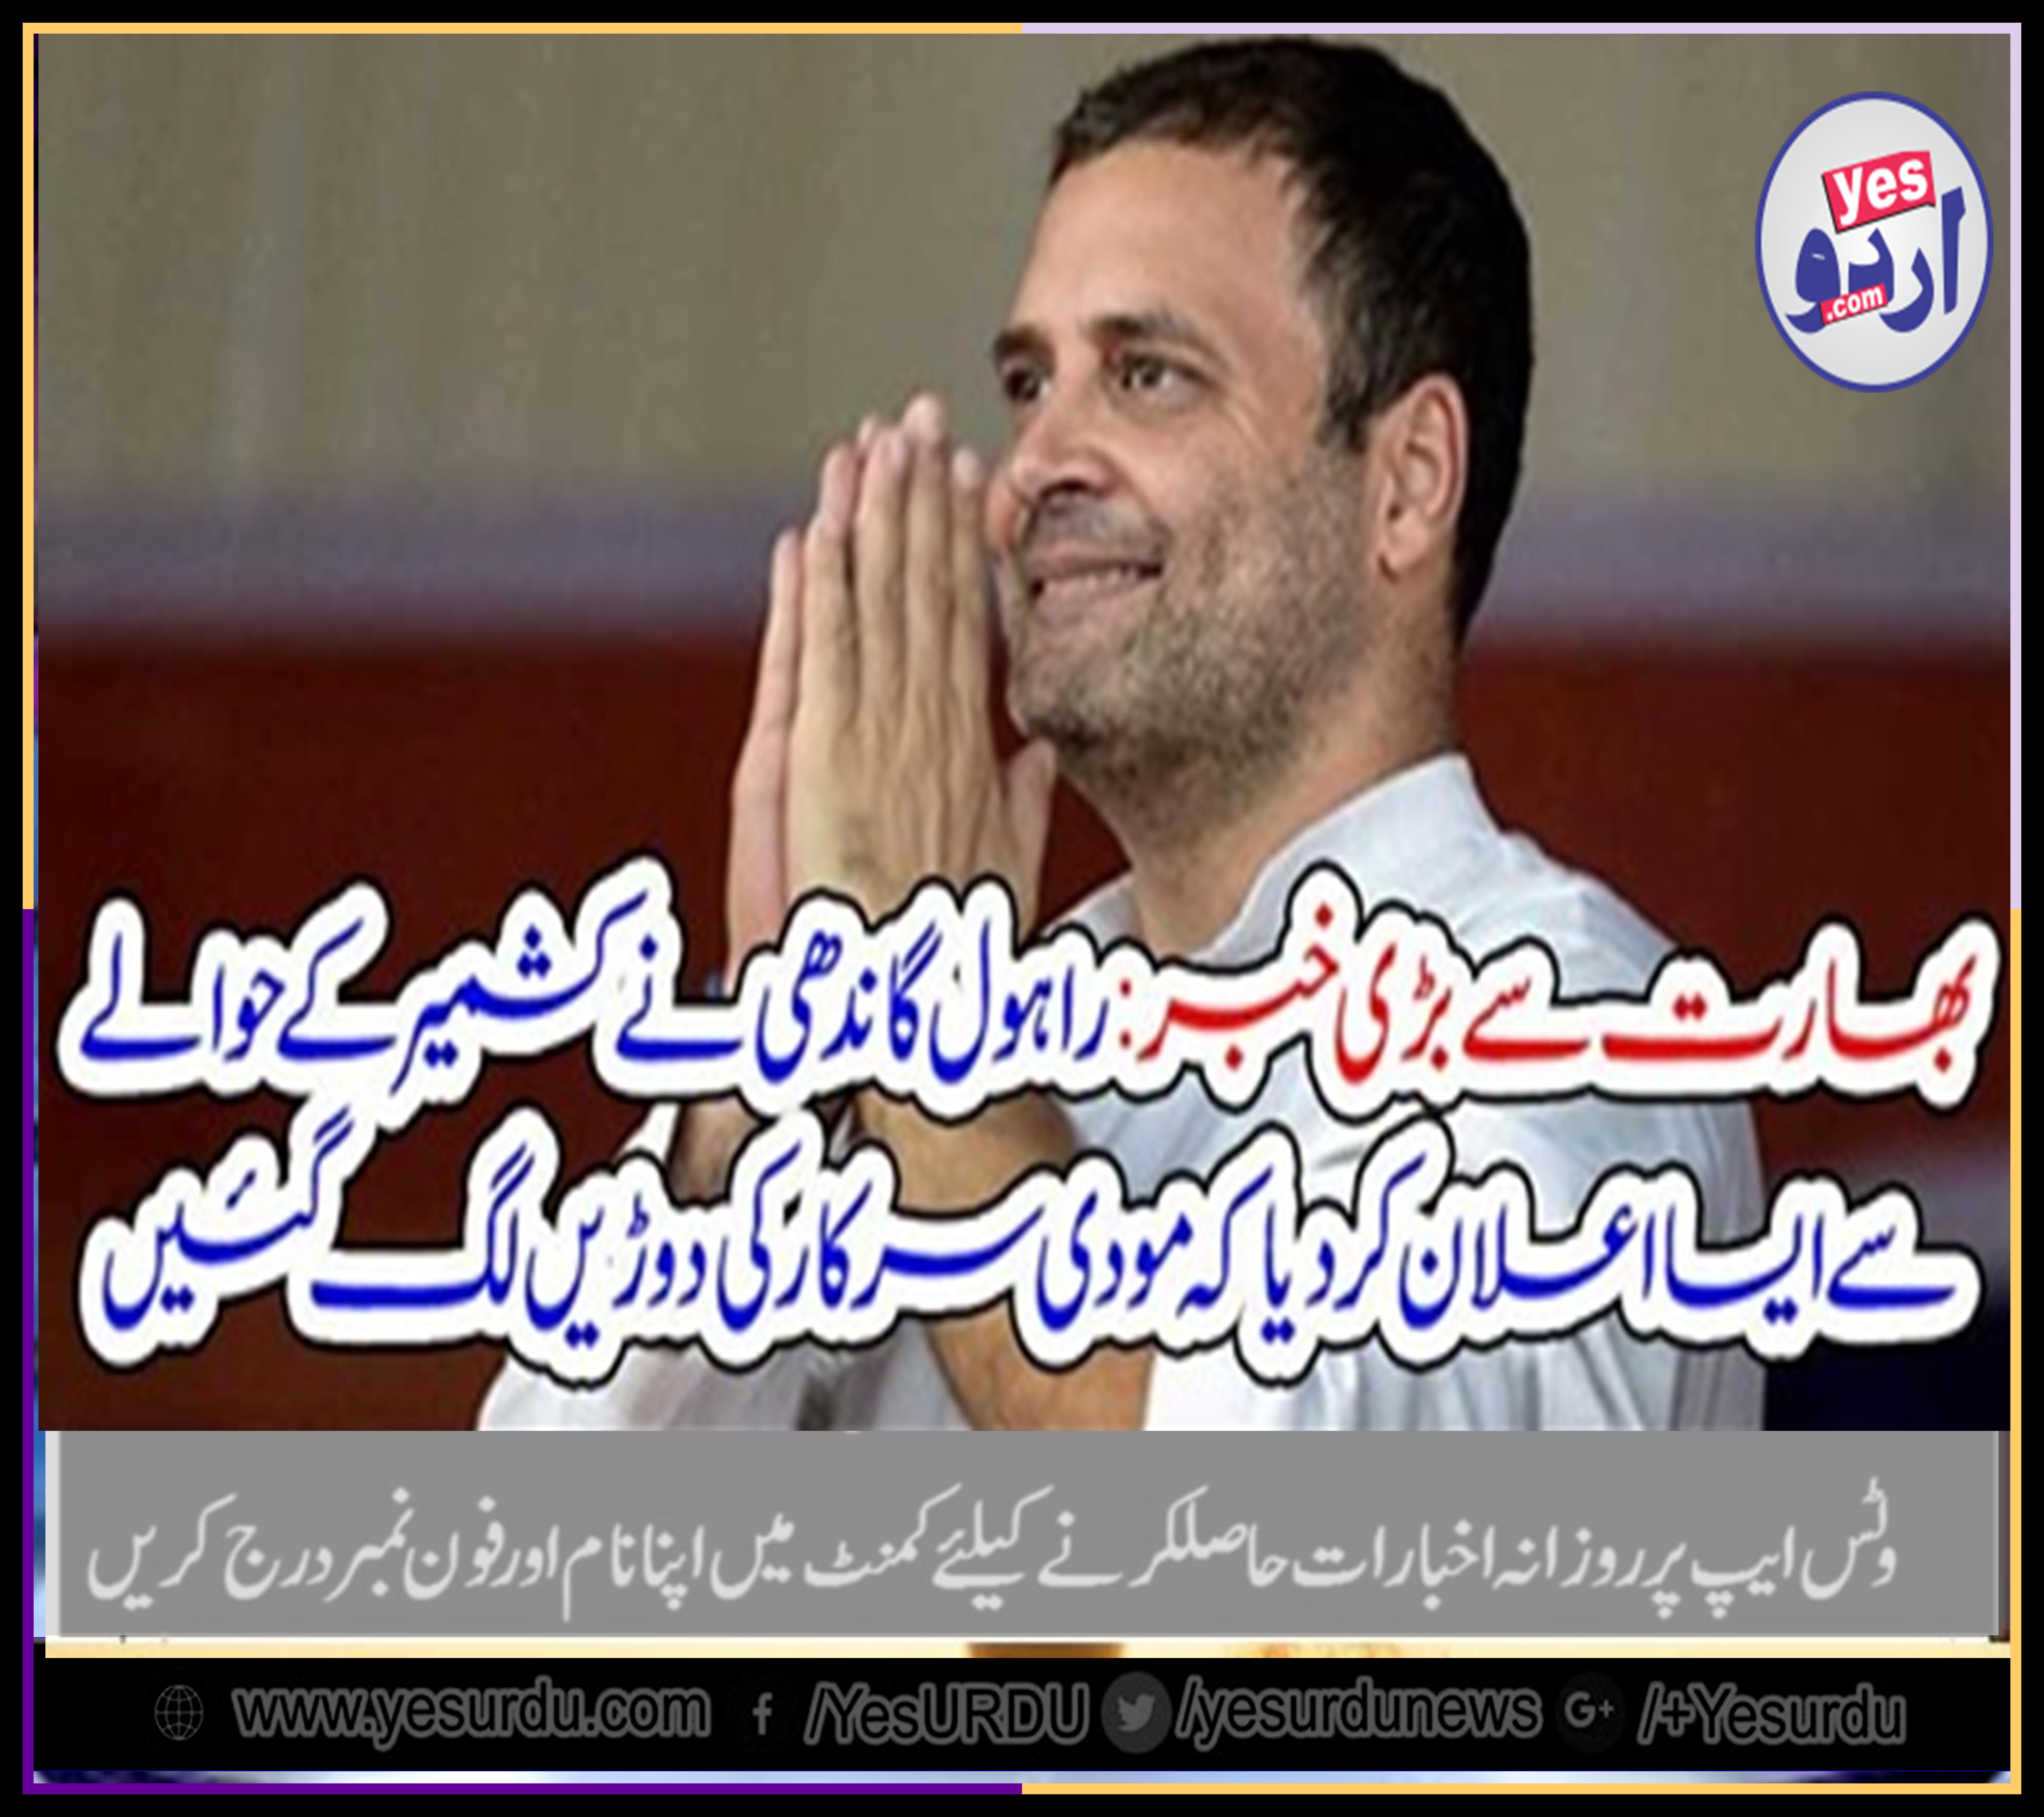 rahul gandhi, latest, statement, made, Indian, Army, and, government, on, rush